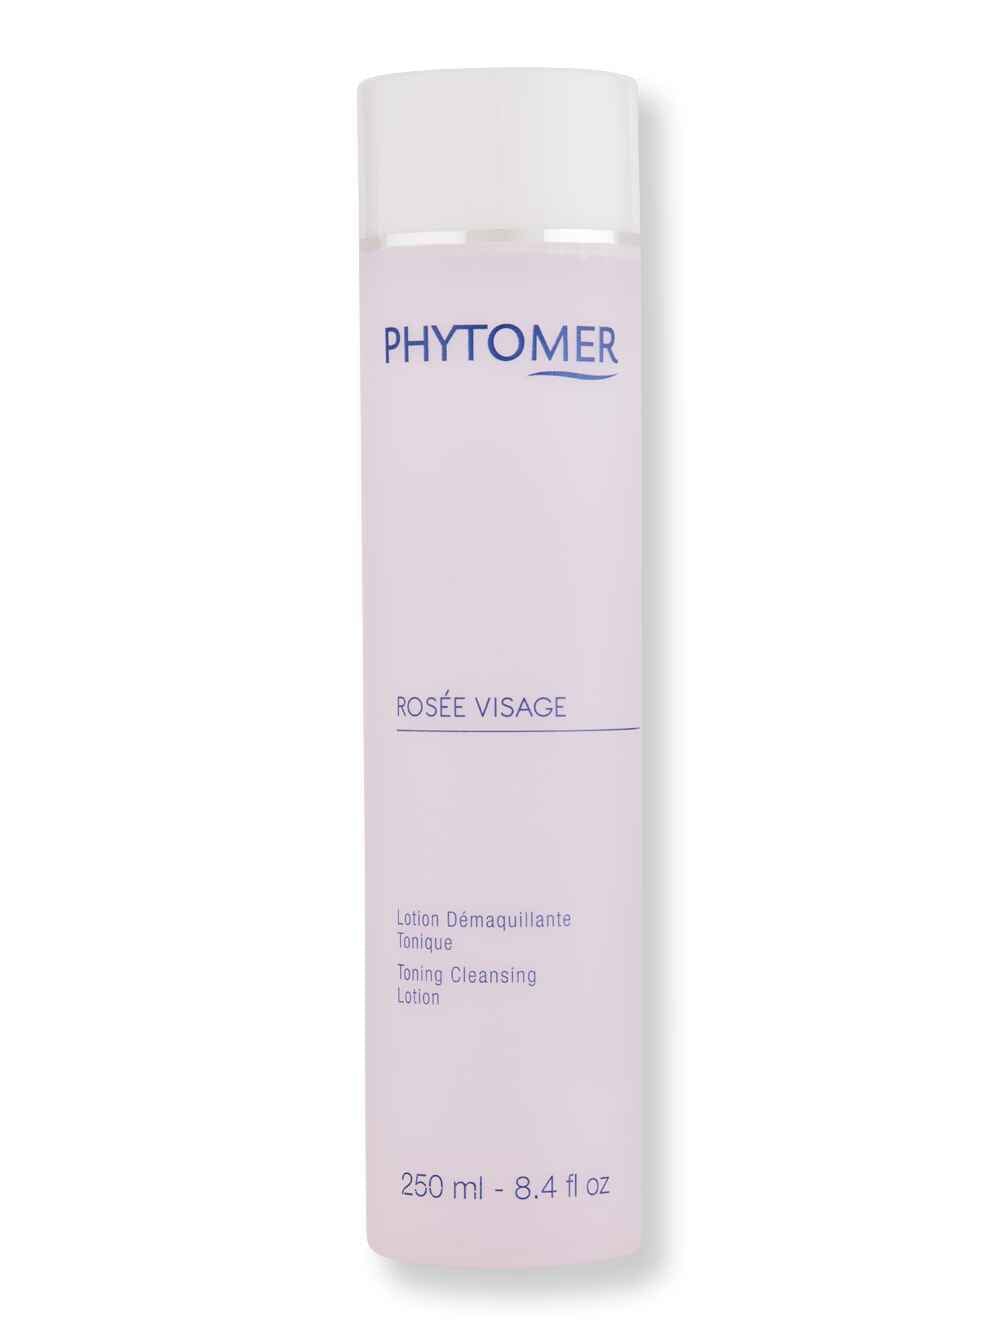 Phytomer Phytomer Rosee Visage Toning Cleansing Lotion 250 ml Face Cleansers 